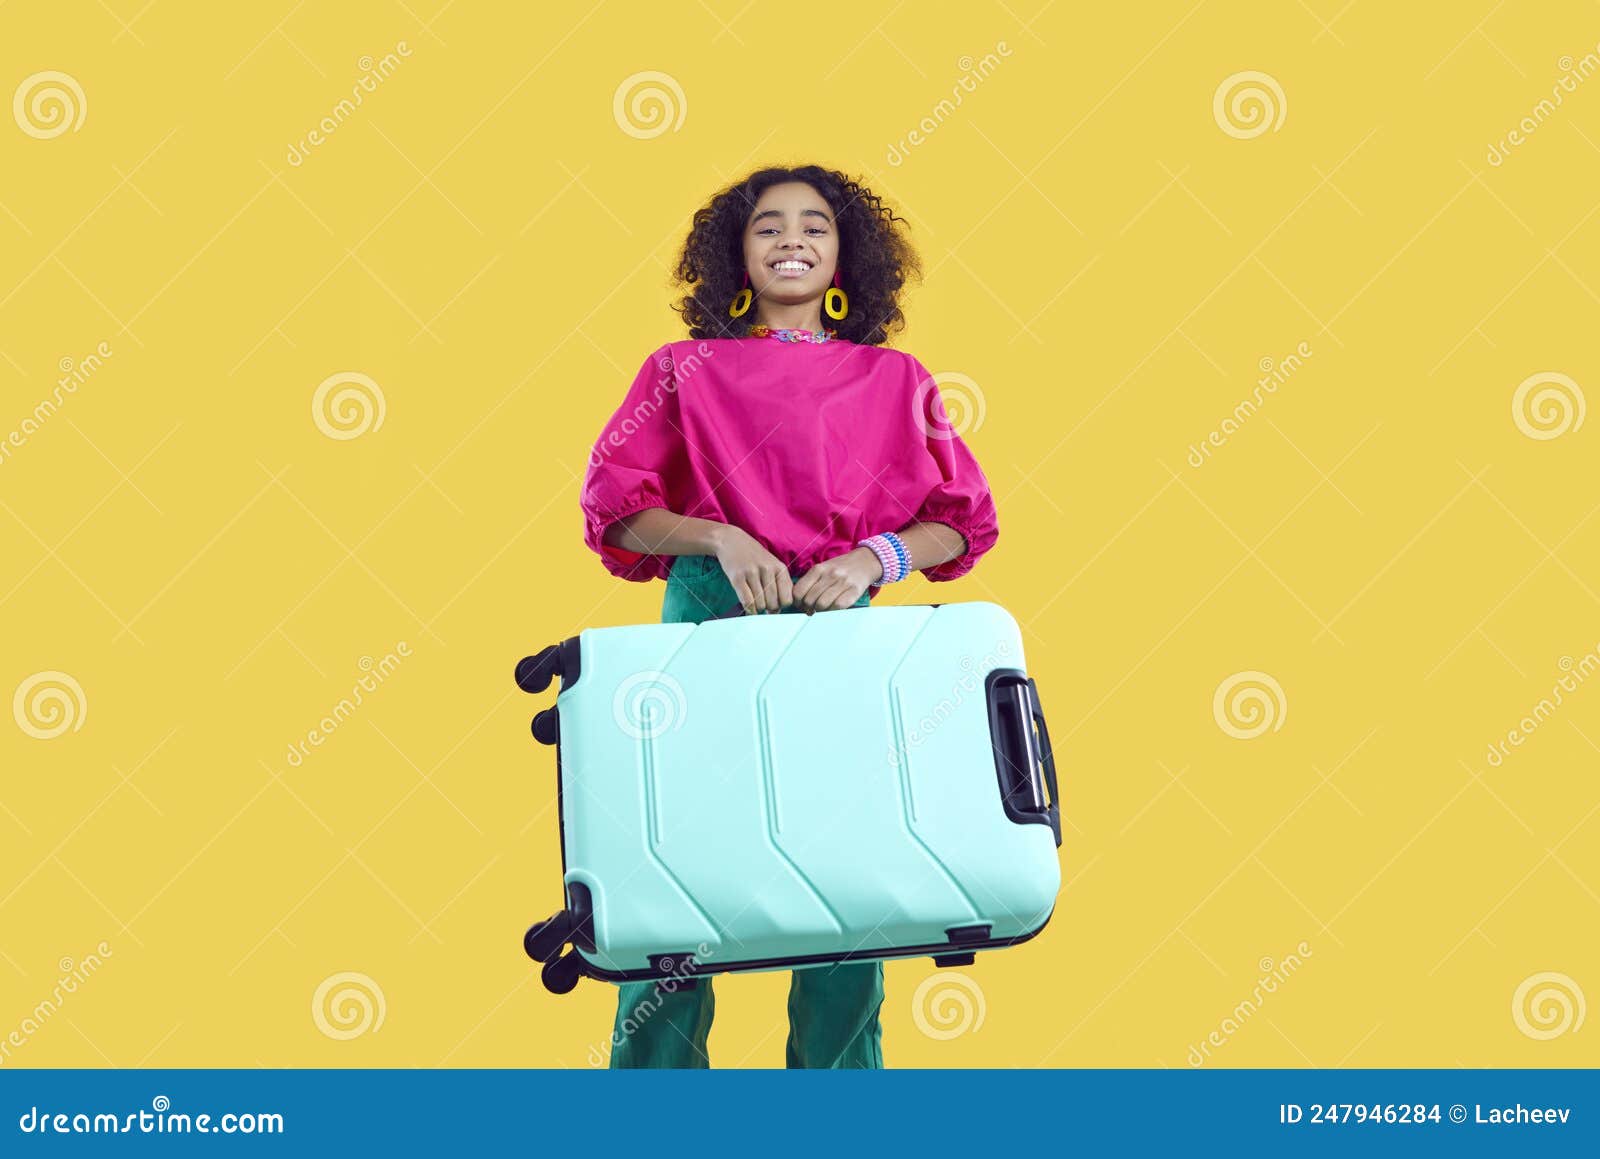 https://thumbs.dreamstime.com/z/happy-beautiful-black-girl-carrying-heavy-suitcase-isolated-yellow-background-happy-child-going-summer-vacation-black-kid-247946284.jpg